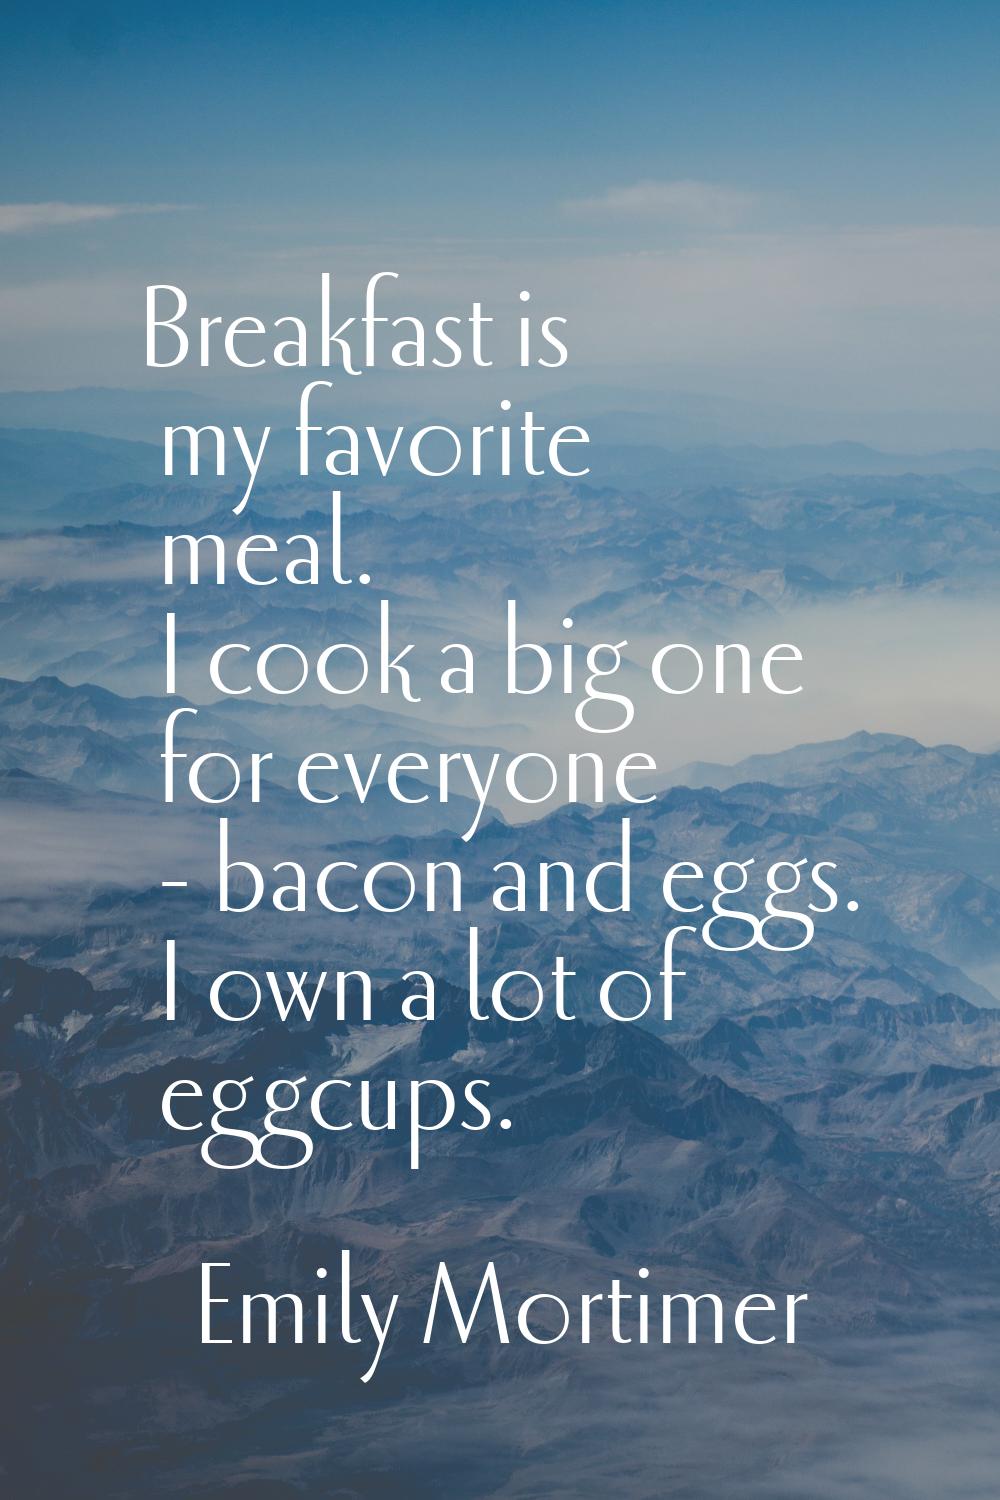 Breakfast is my favorite meal. I cook a big one for everyone - bacon and eggs. I own a lot of eggcu